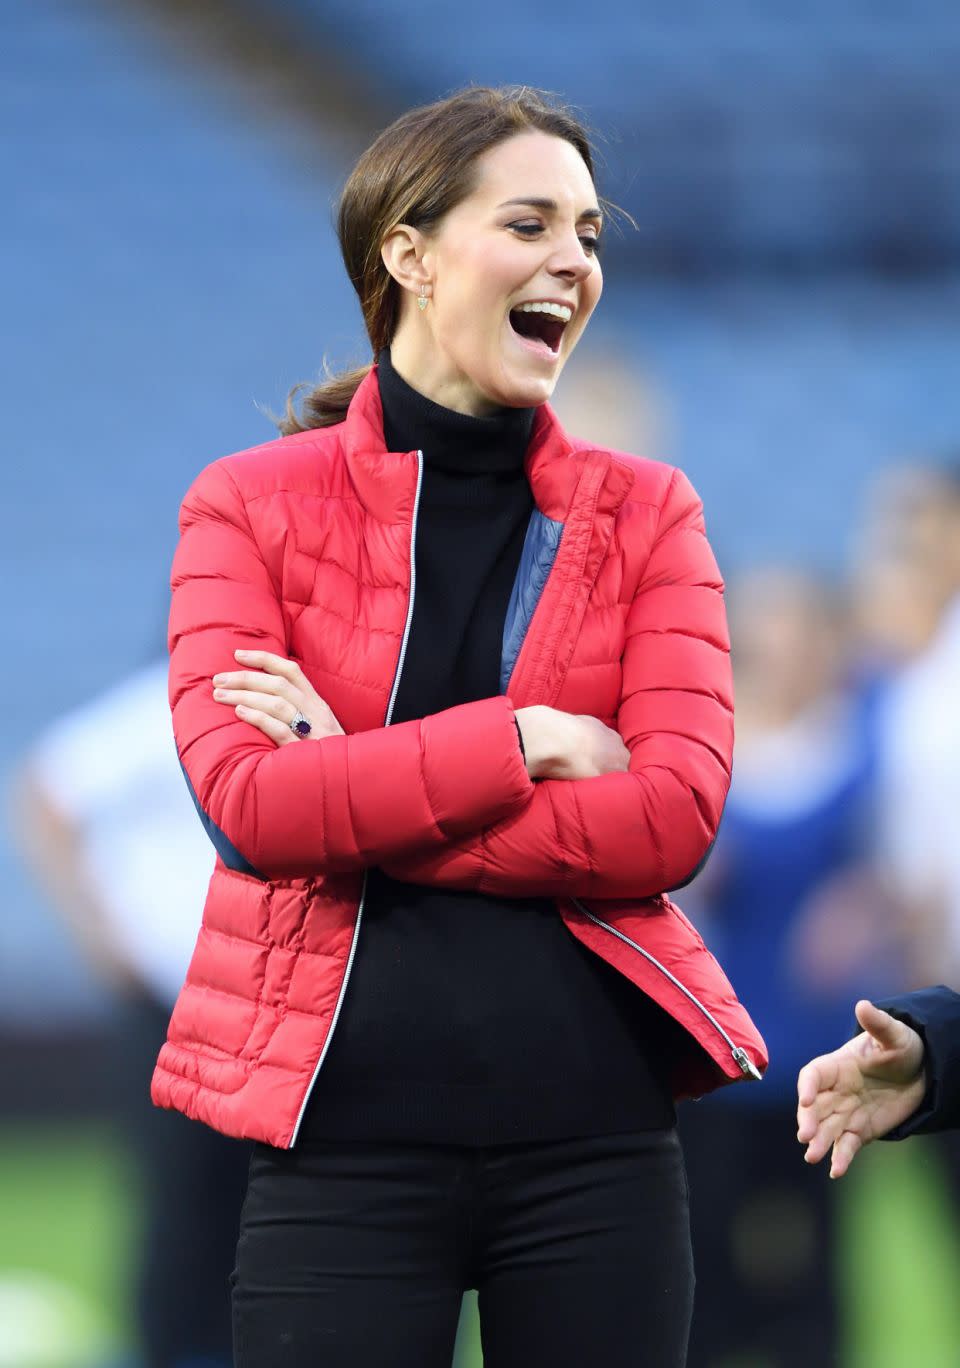 The usually composed 35-year-old royal made an official visit to Aston Villa Football Club yesterday, where she met with people from the Coach Core mentoring program. Photo: Getty Images